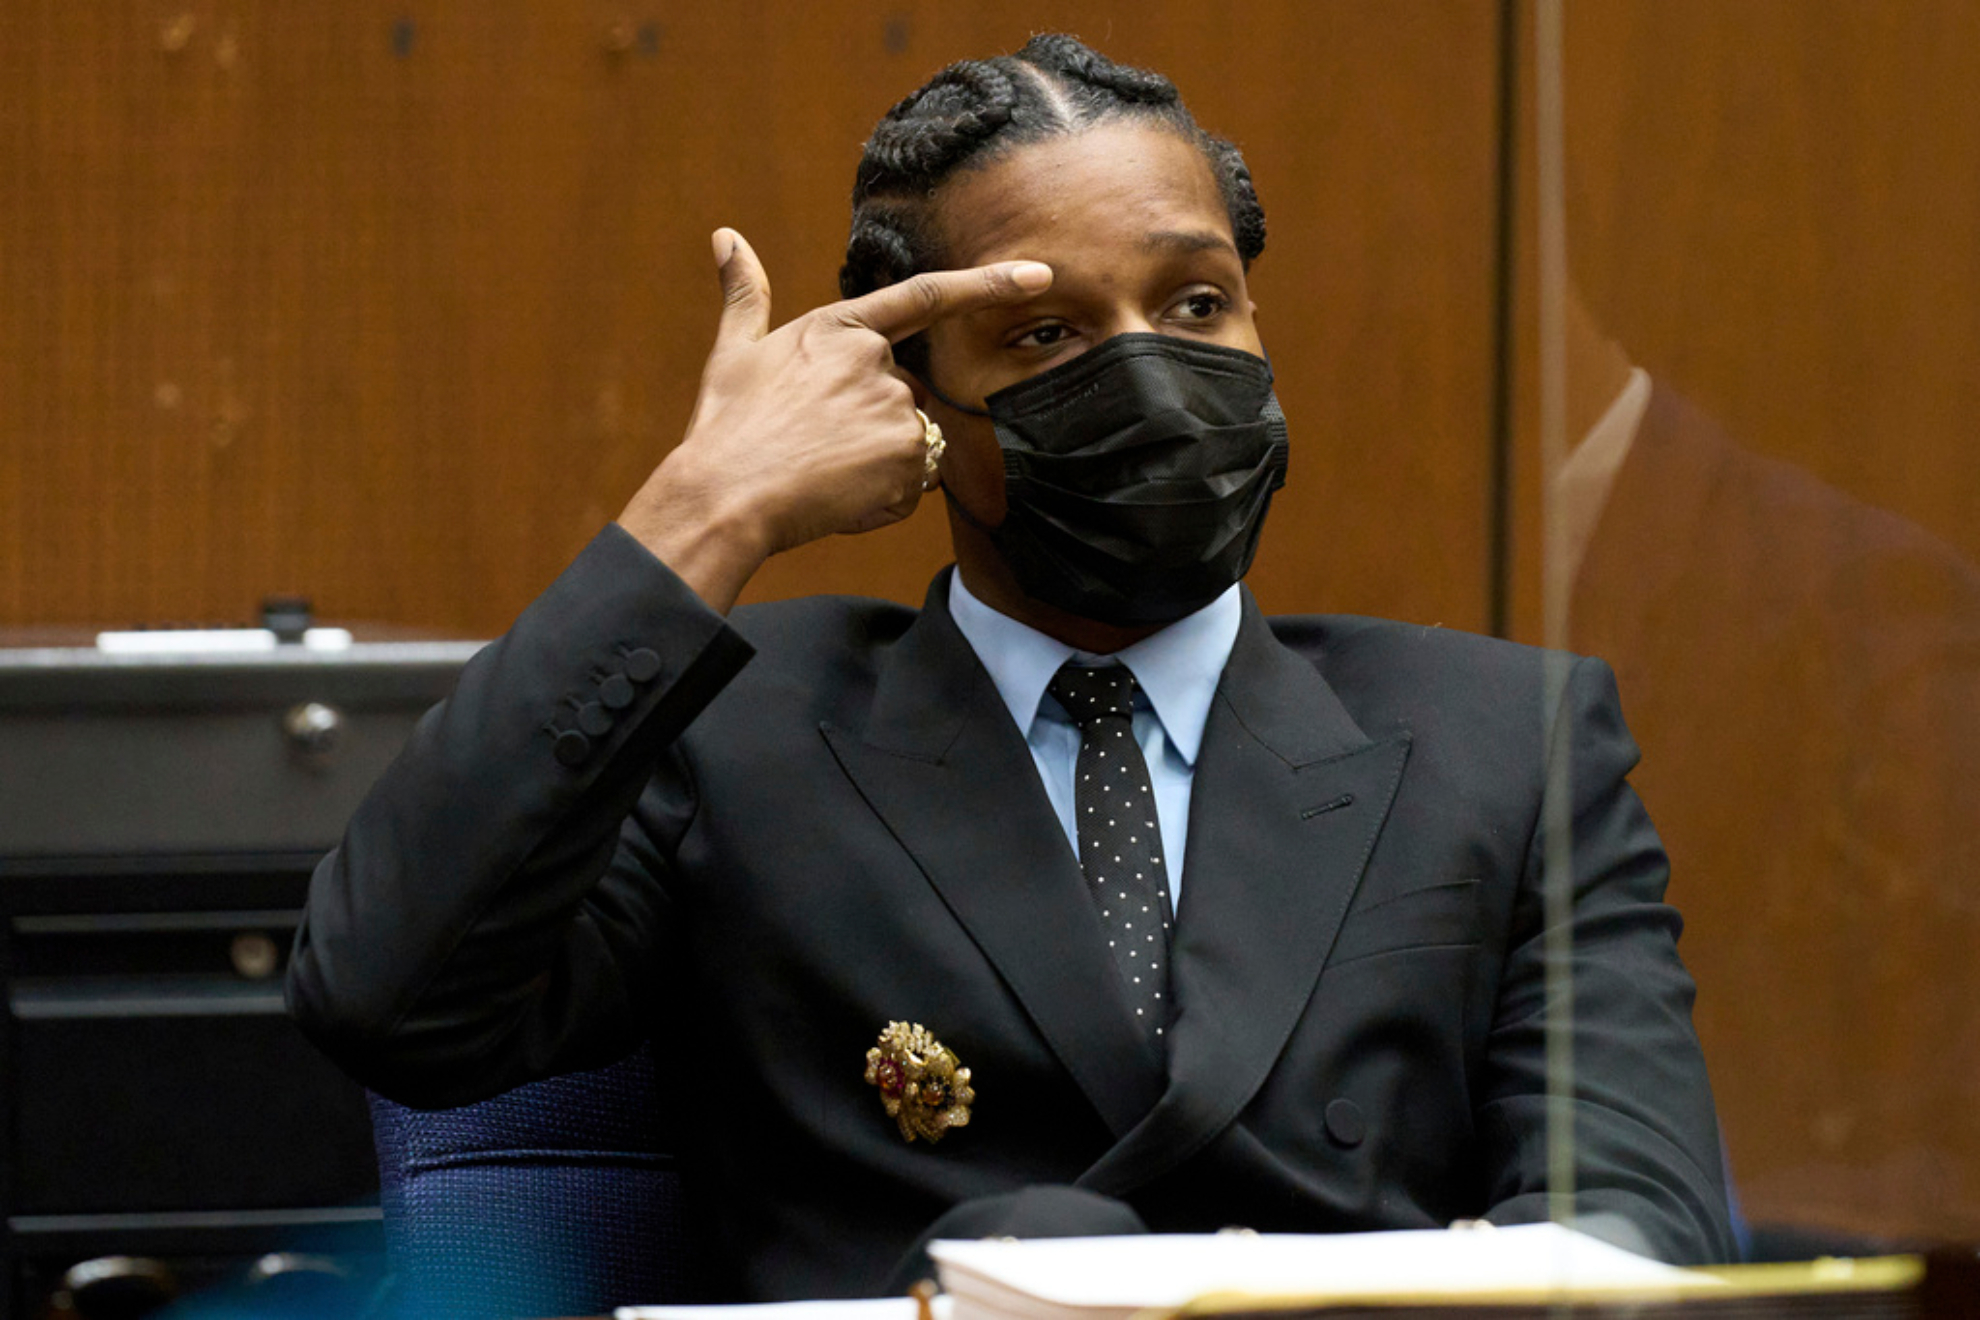 A$AP Rocky's prosecutors present video evidence claiming he held a gun during confrontation